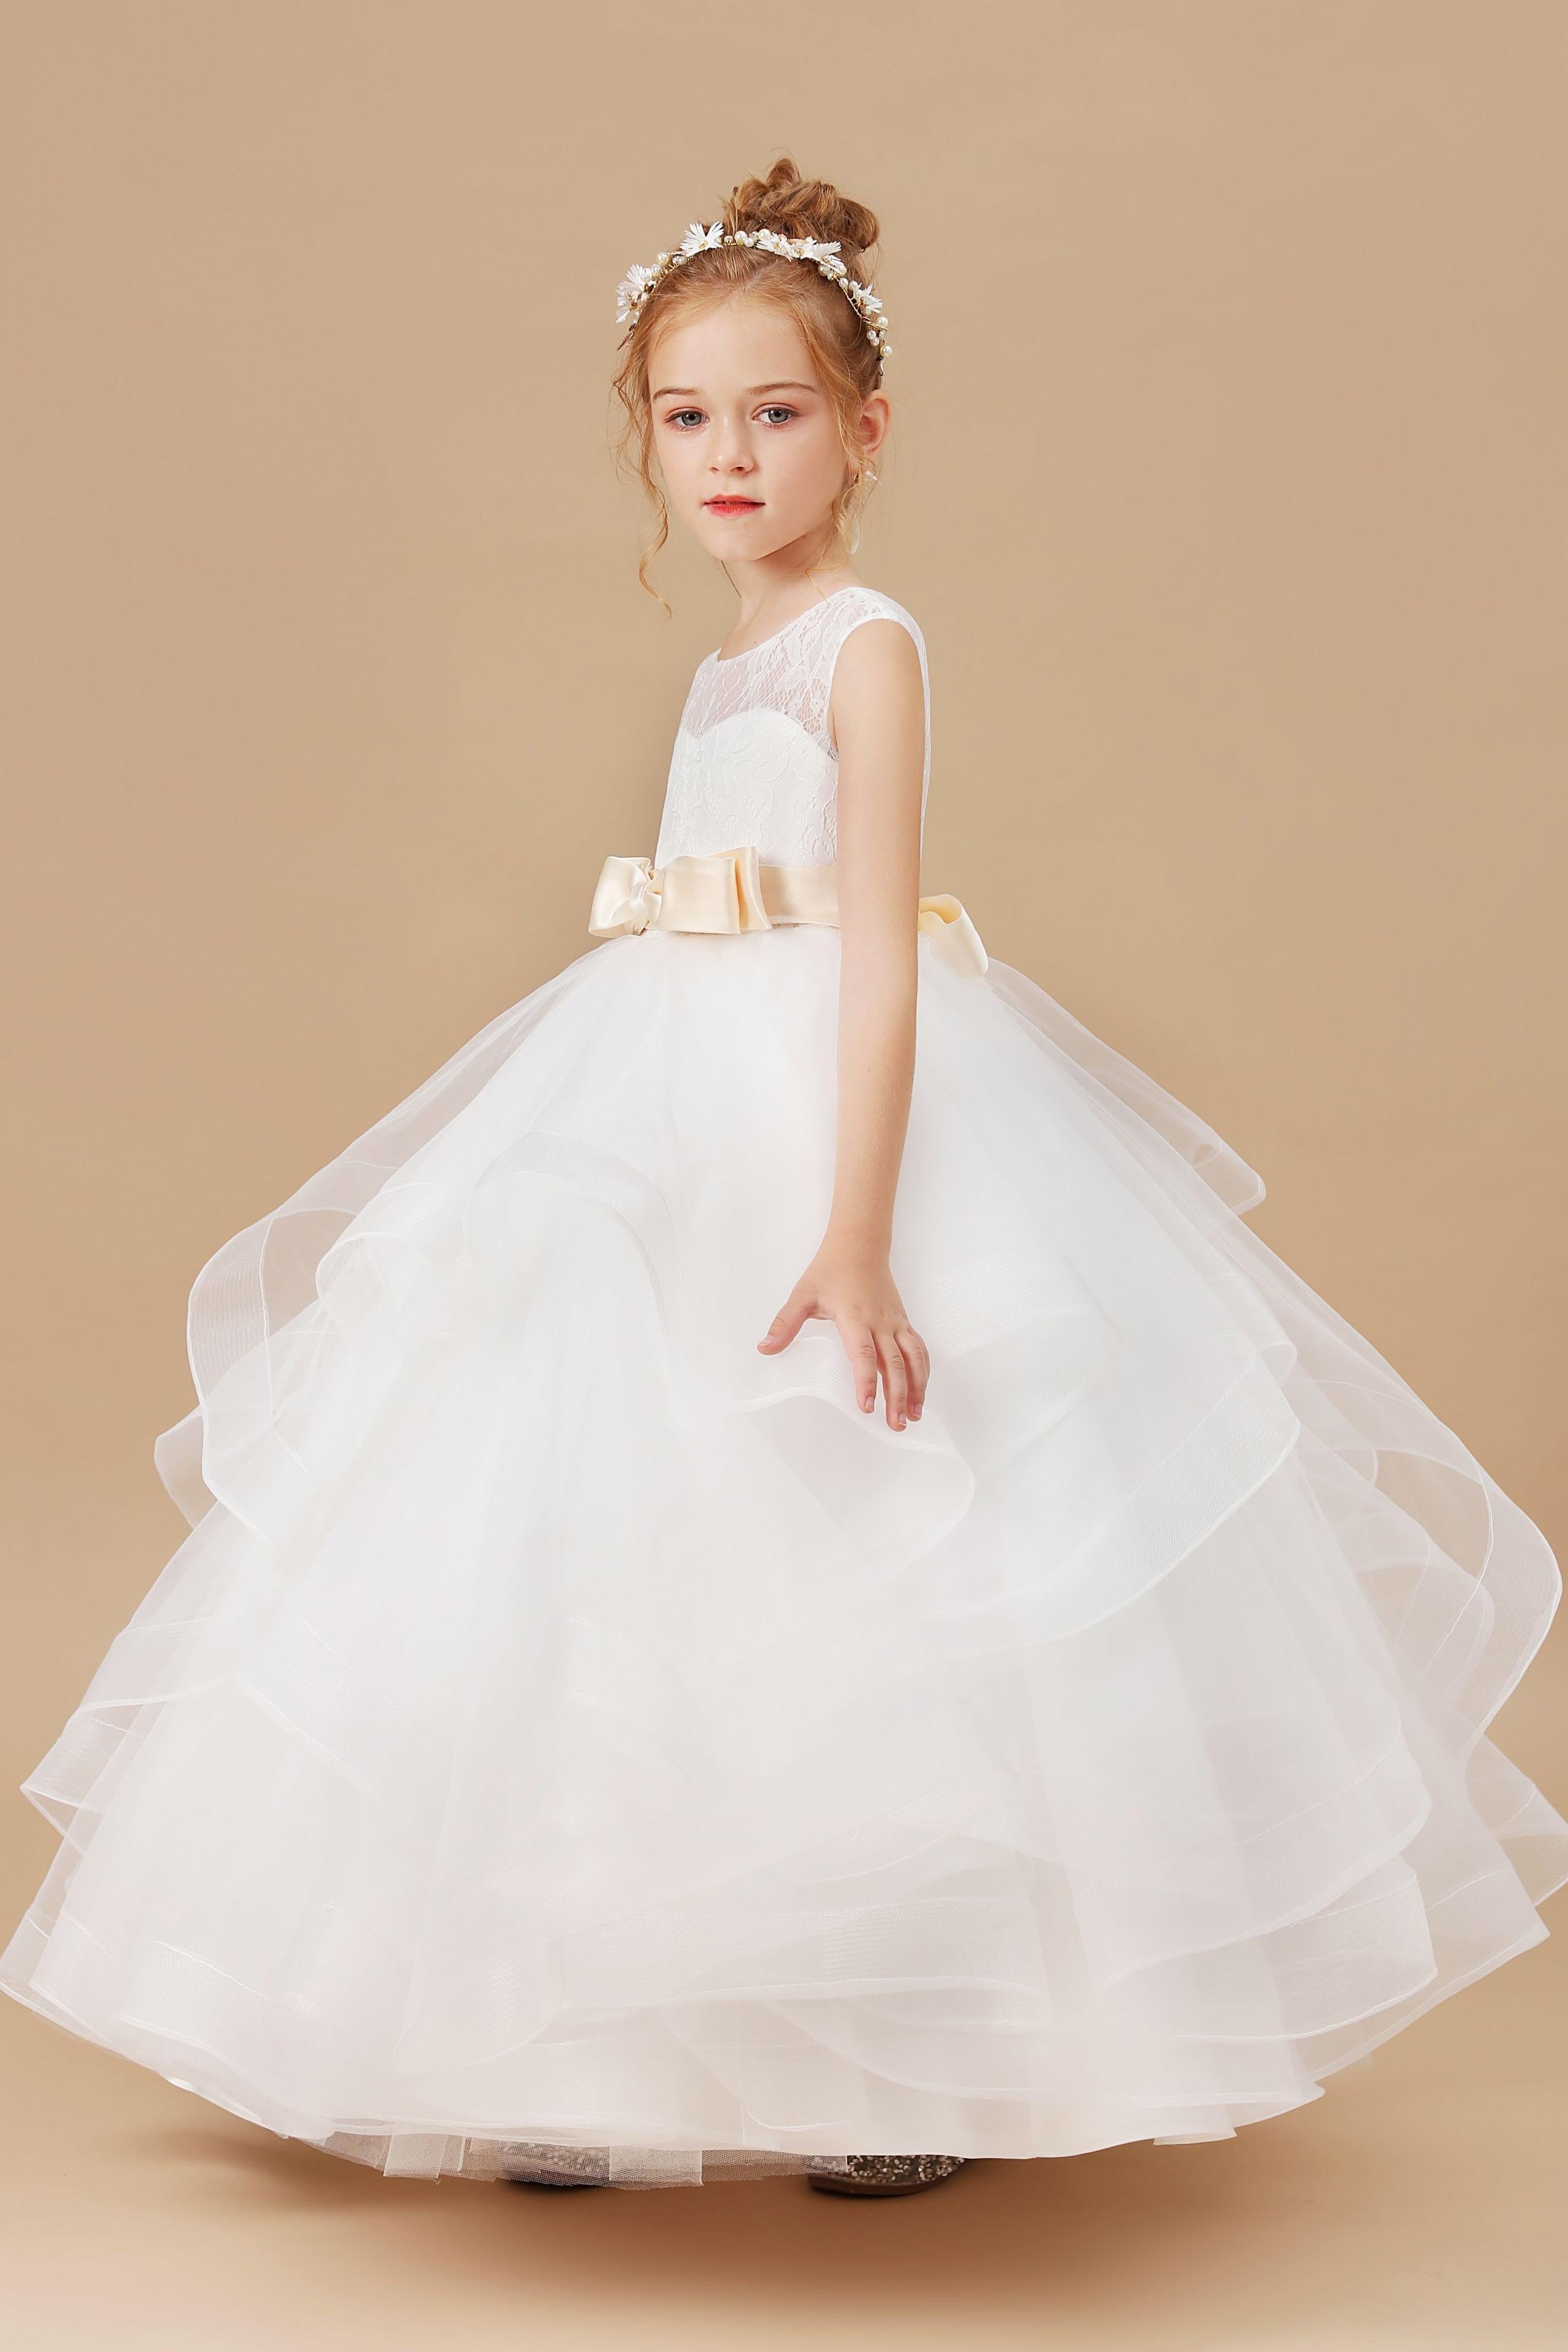 Ruffled Satin Ivory Multi-layered Tulle Flower Girl Dress With Champagne Bow